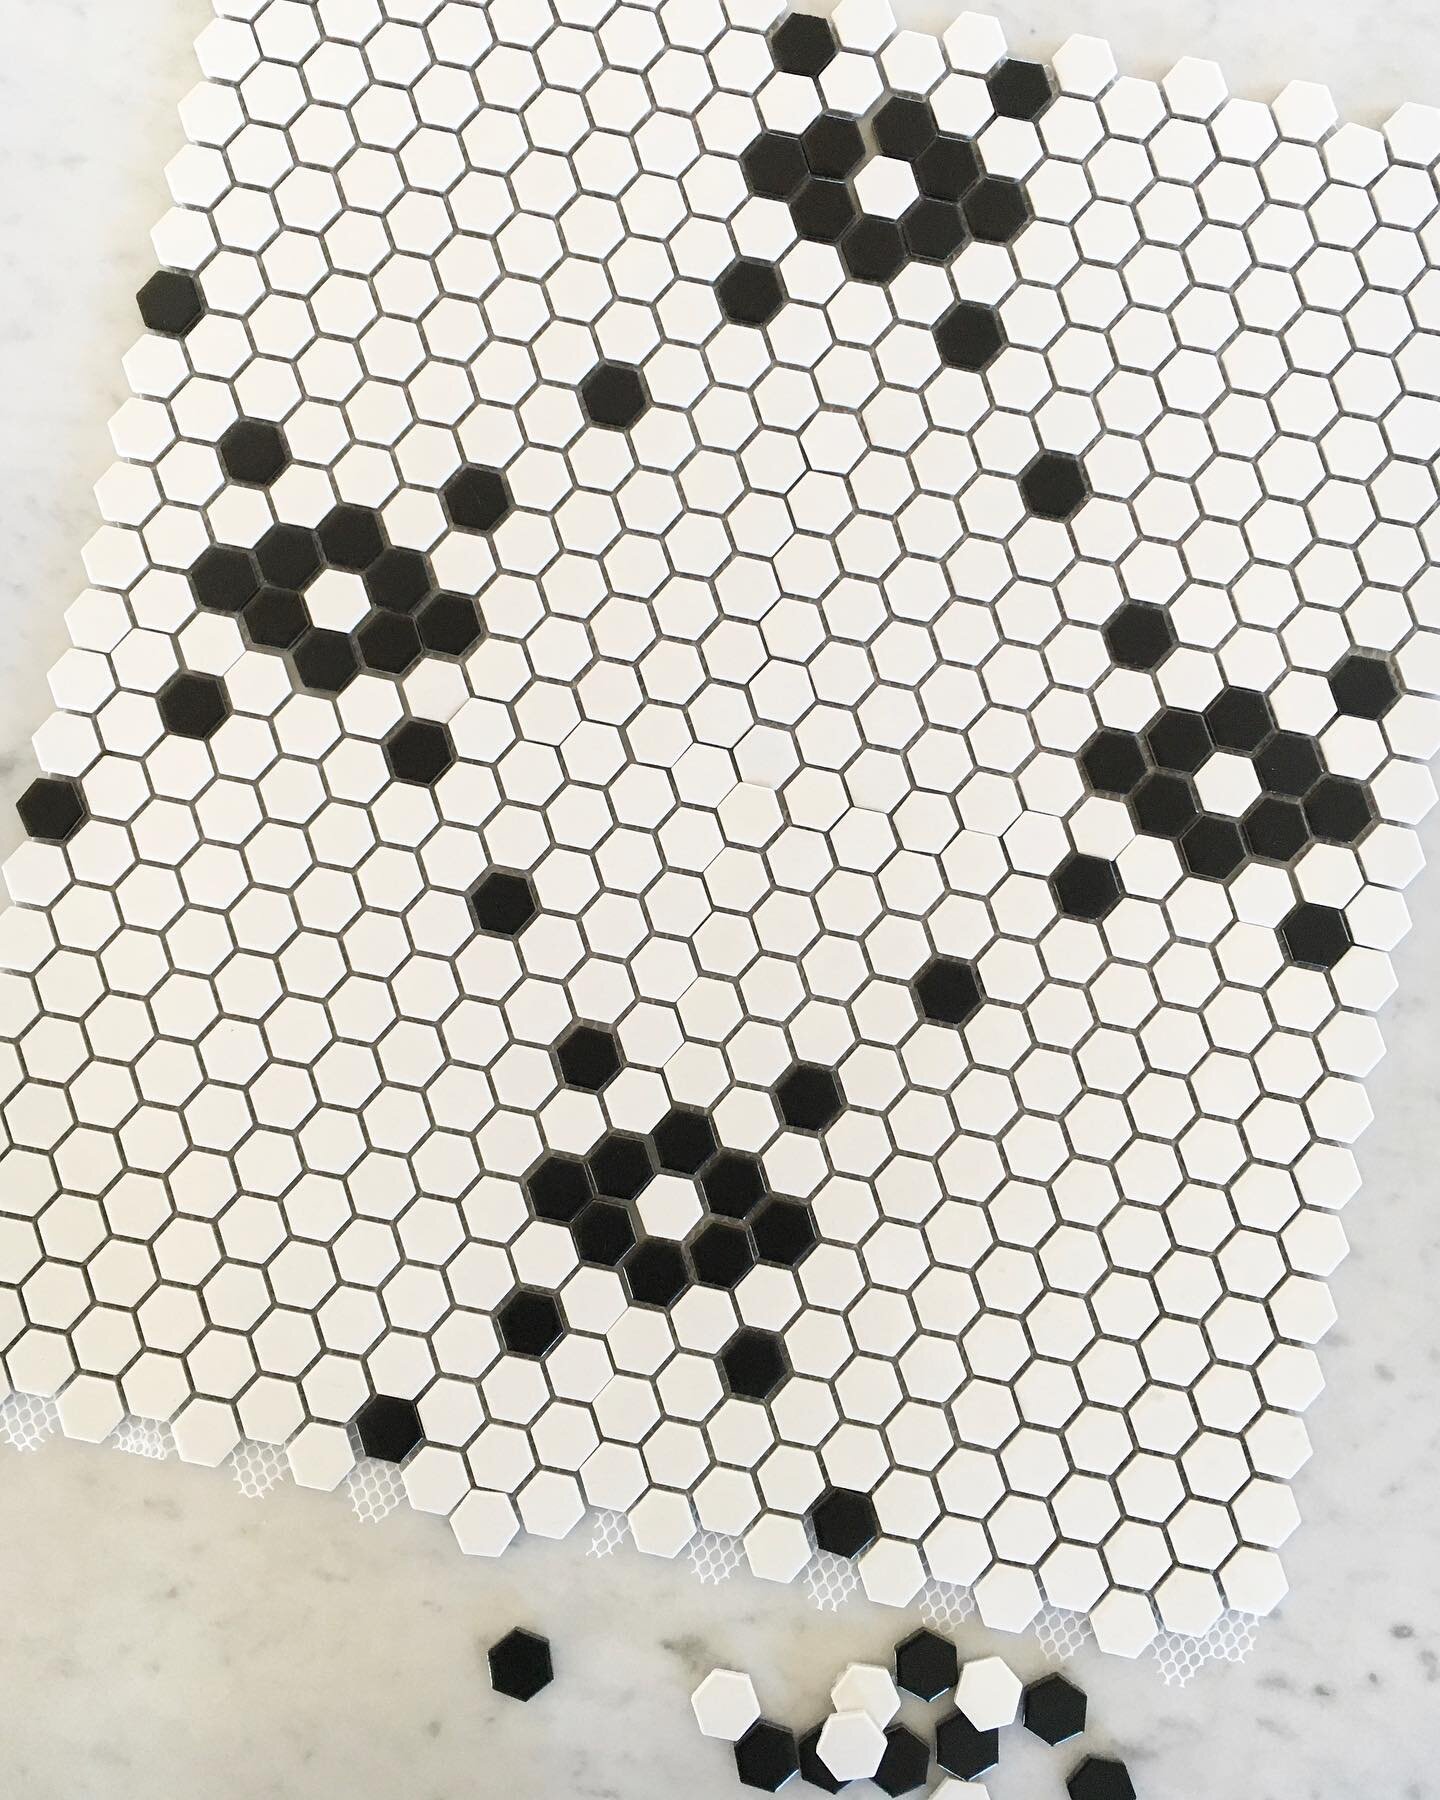 Pattern play 🖤 🤍 🖤 ...We designed these hex mosaic patterns last year, and now finally getting to see the mock-ups for approval. ✔️ Stay tuned for the install happening this spring!  #CRIDprogress #CRIDcraftsmancottage #tile #hextile #tilepattern 